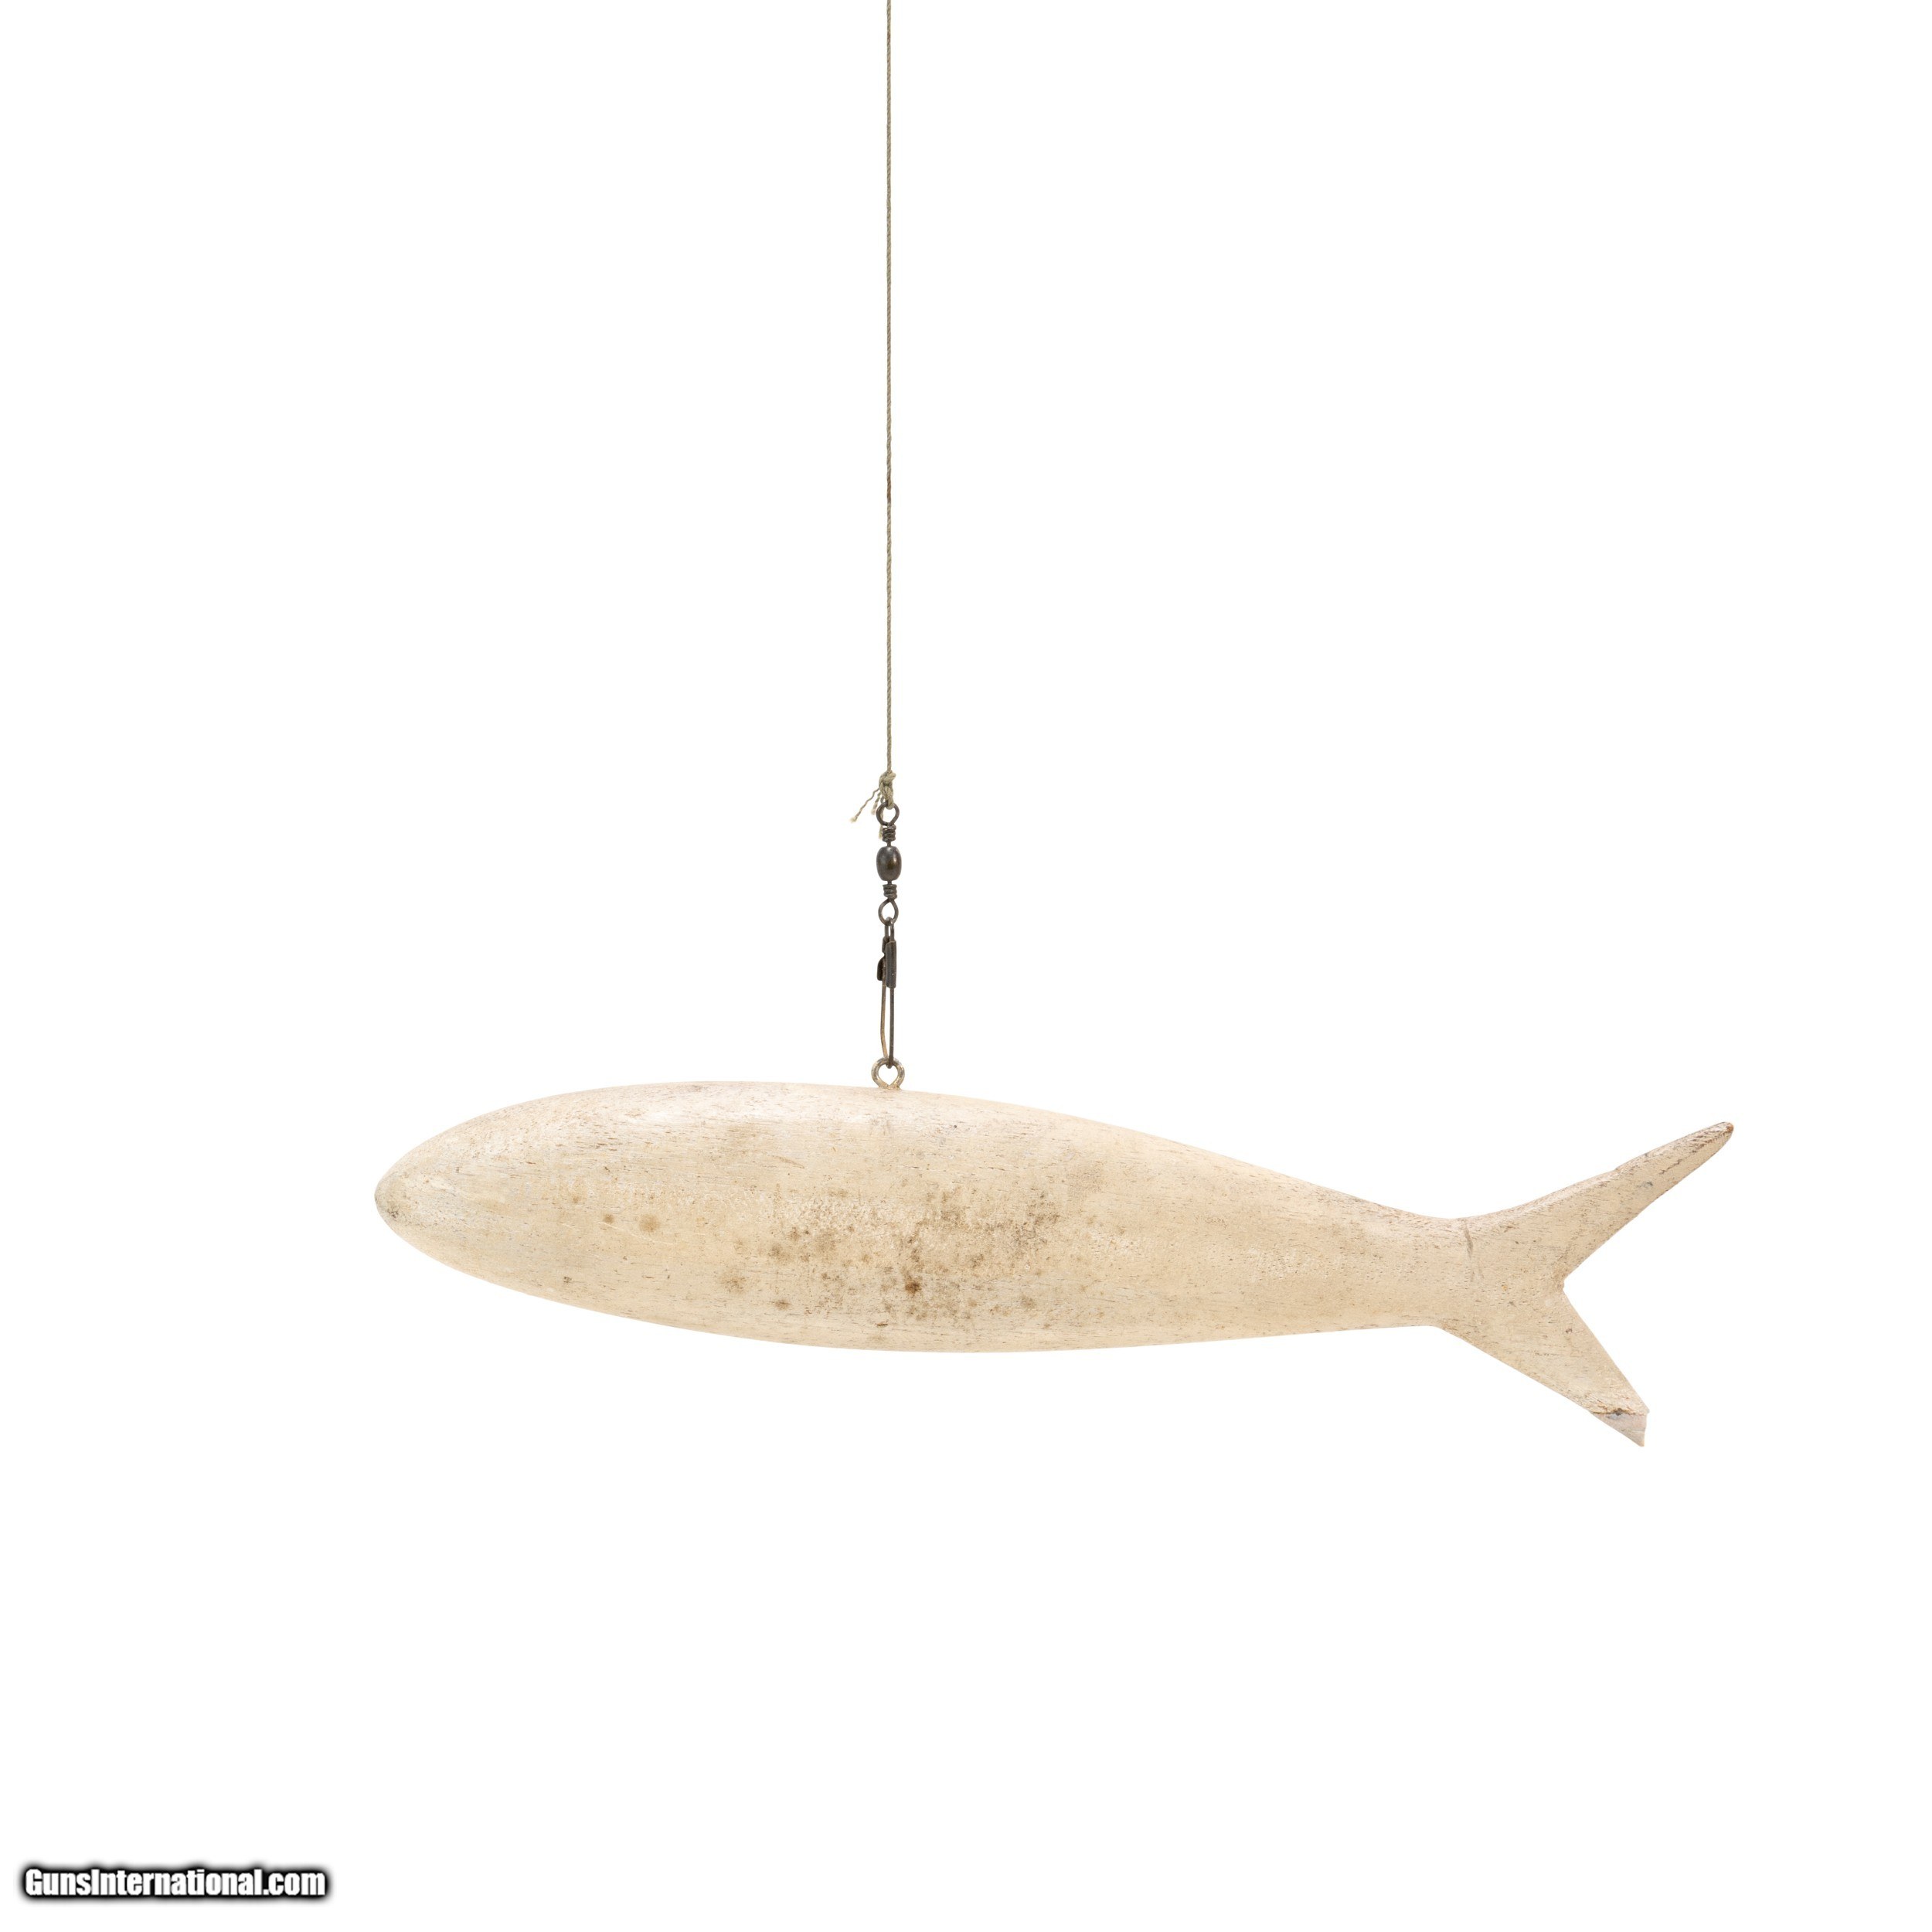 Spear Fishing Pike Decoy for sale